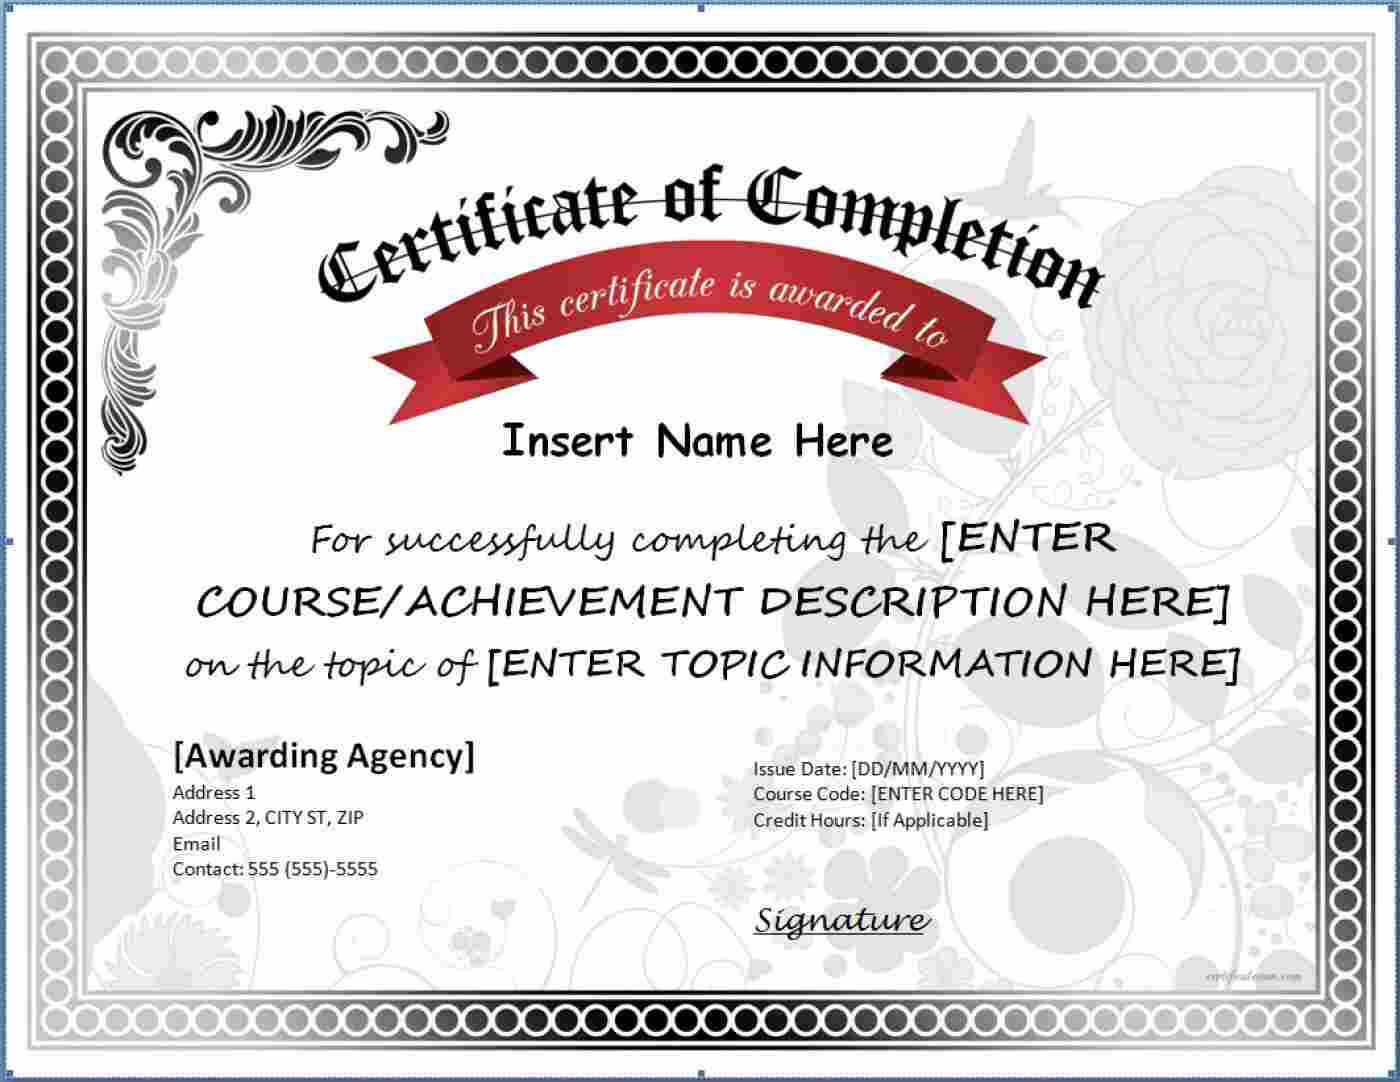 005 Certificate Of Completion Template Free Printable Intended For Certificate Of Completion Template Free Printable